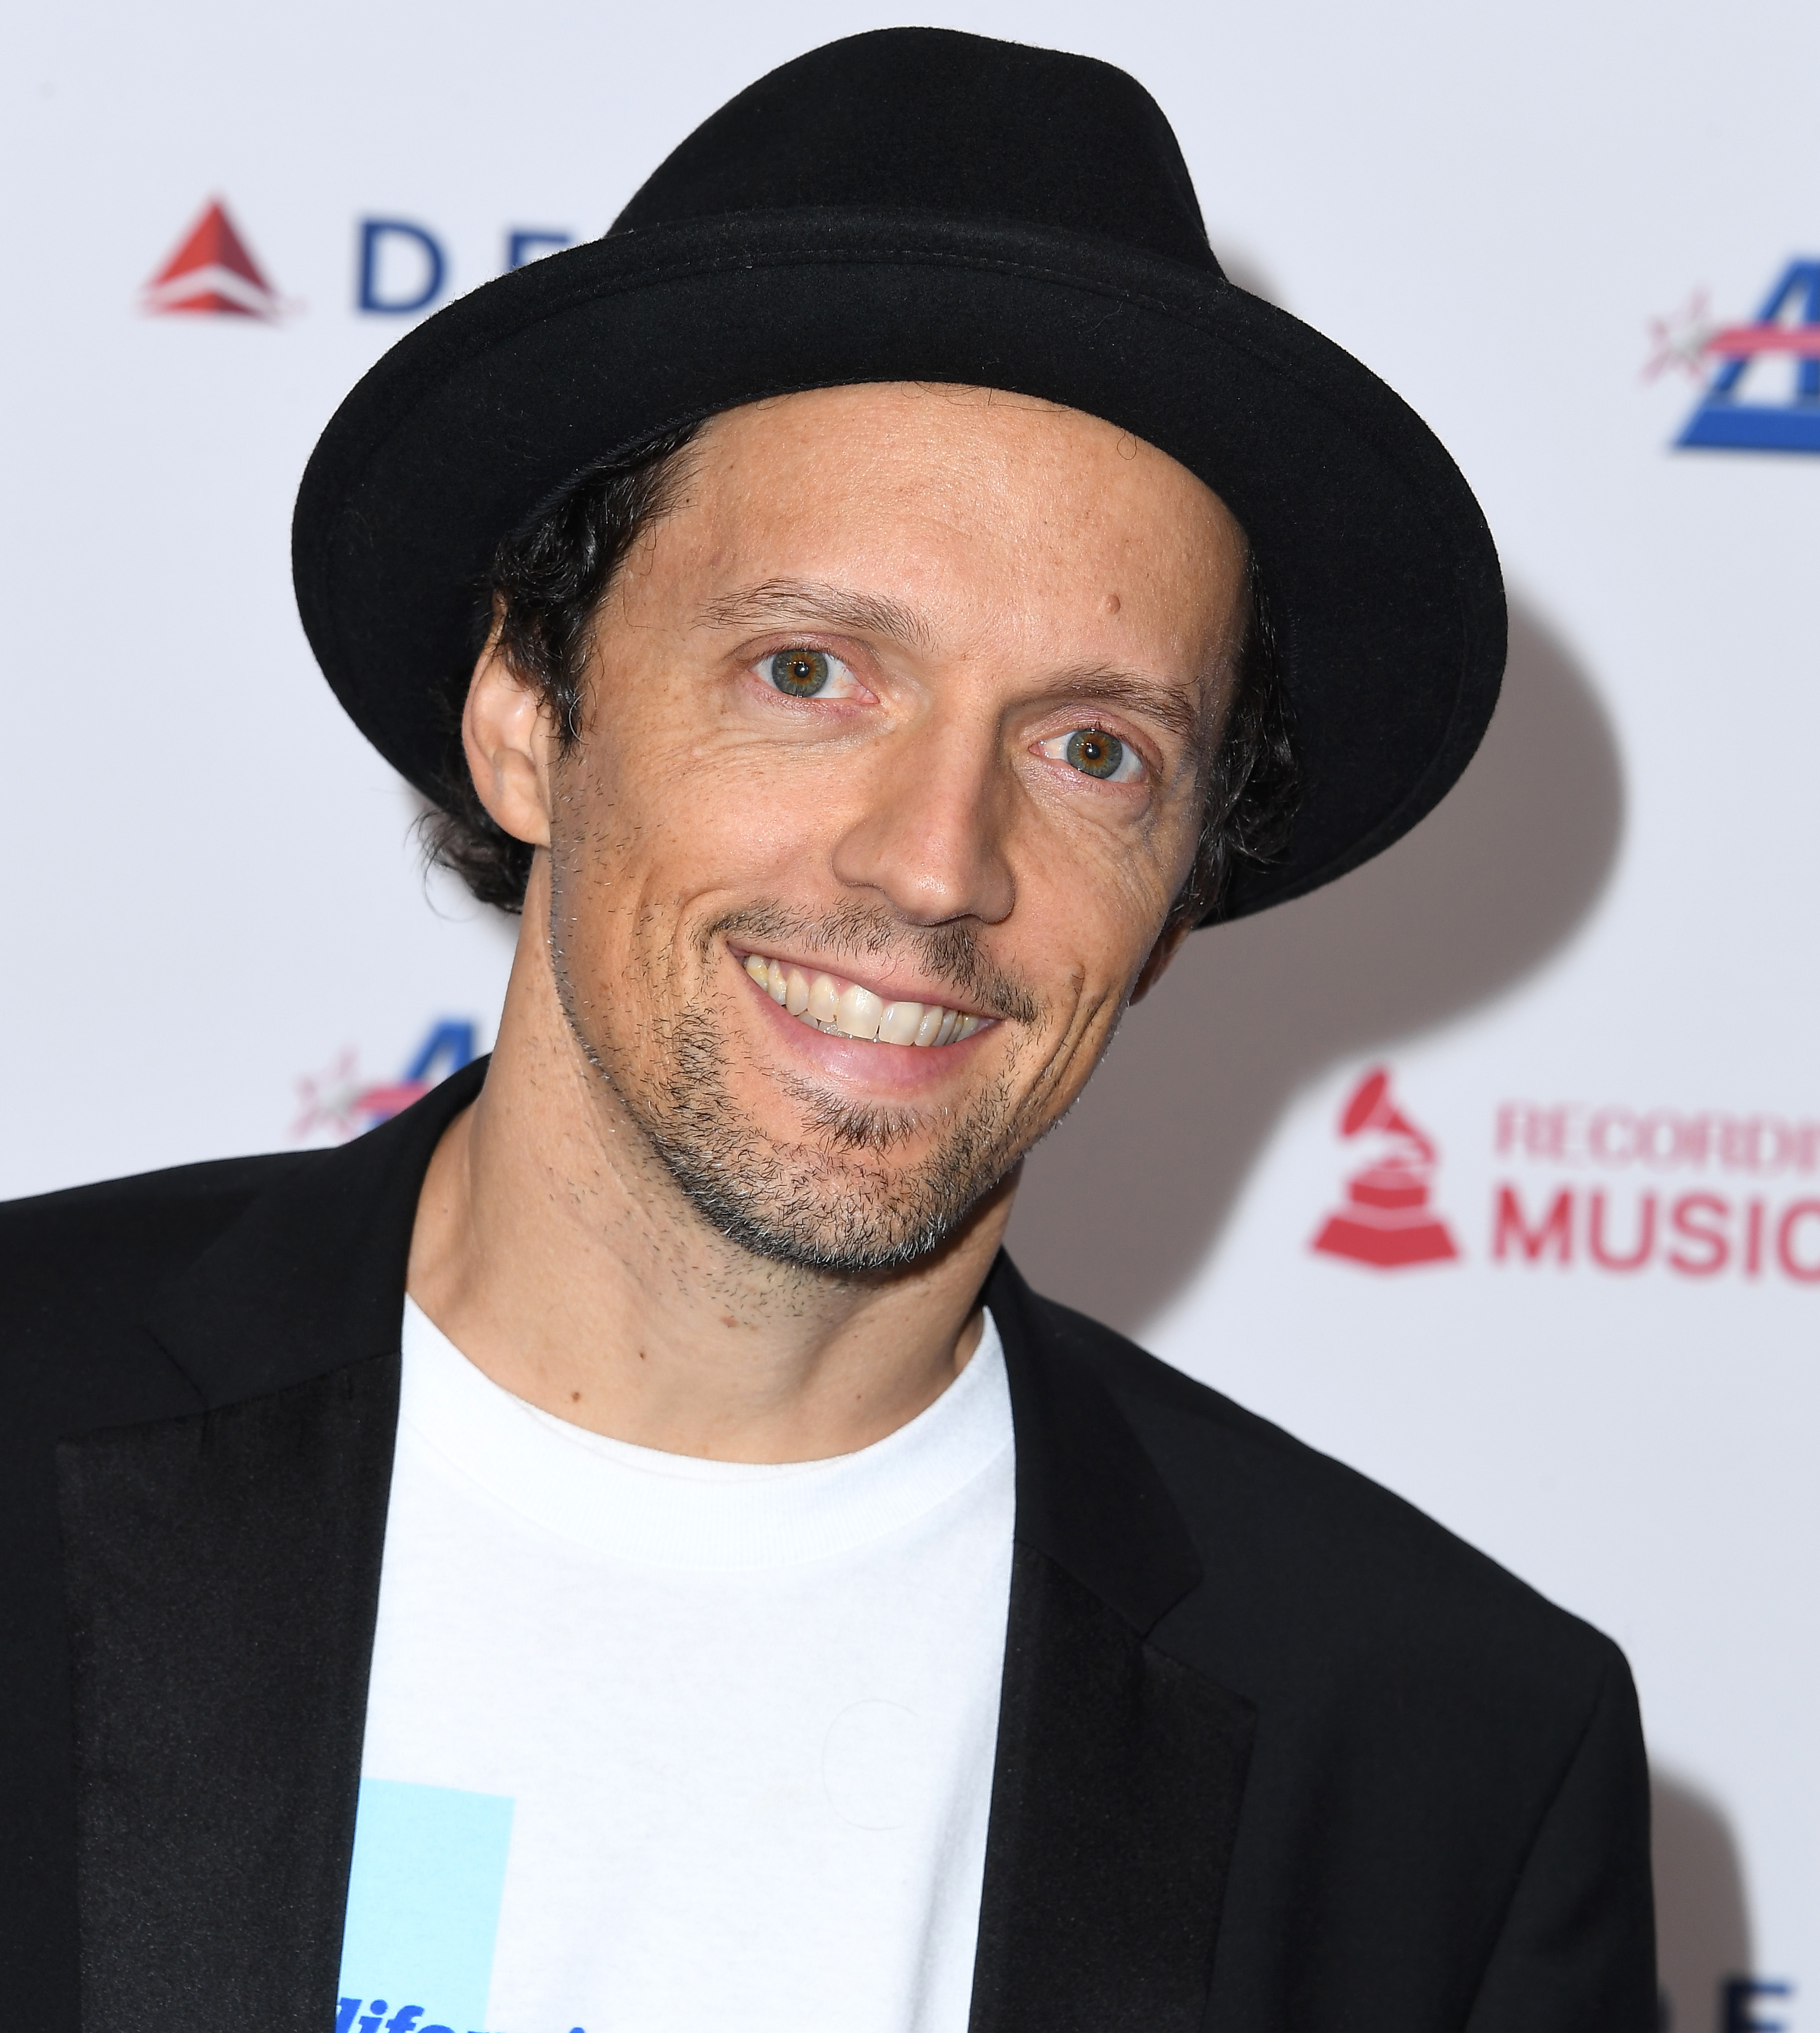 Jason Mraz arrives at the 2020 MusiCares Person of the Year honoring Aerosmith at West Hall in the Los Angeles Convention Center on January 24, 2020, in Los Angeles, California. | Source: Getty Images